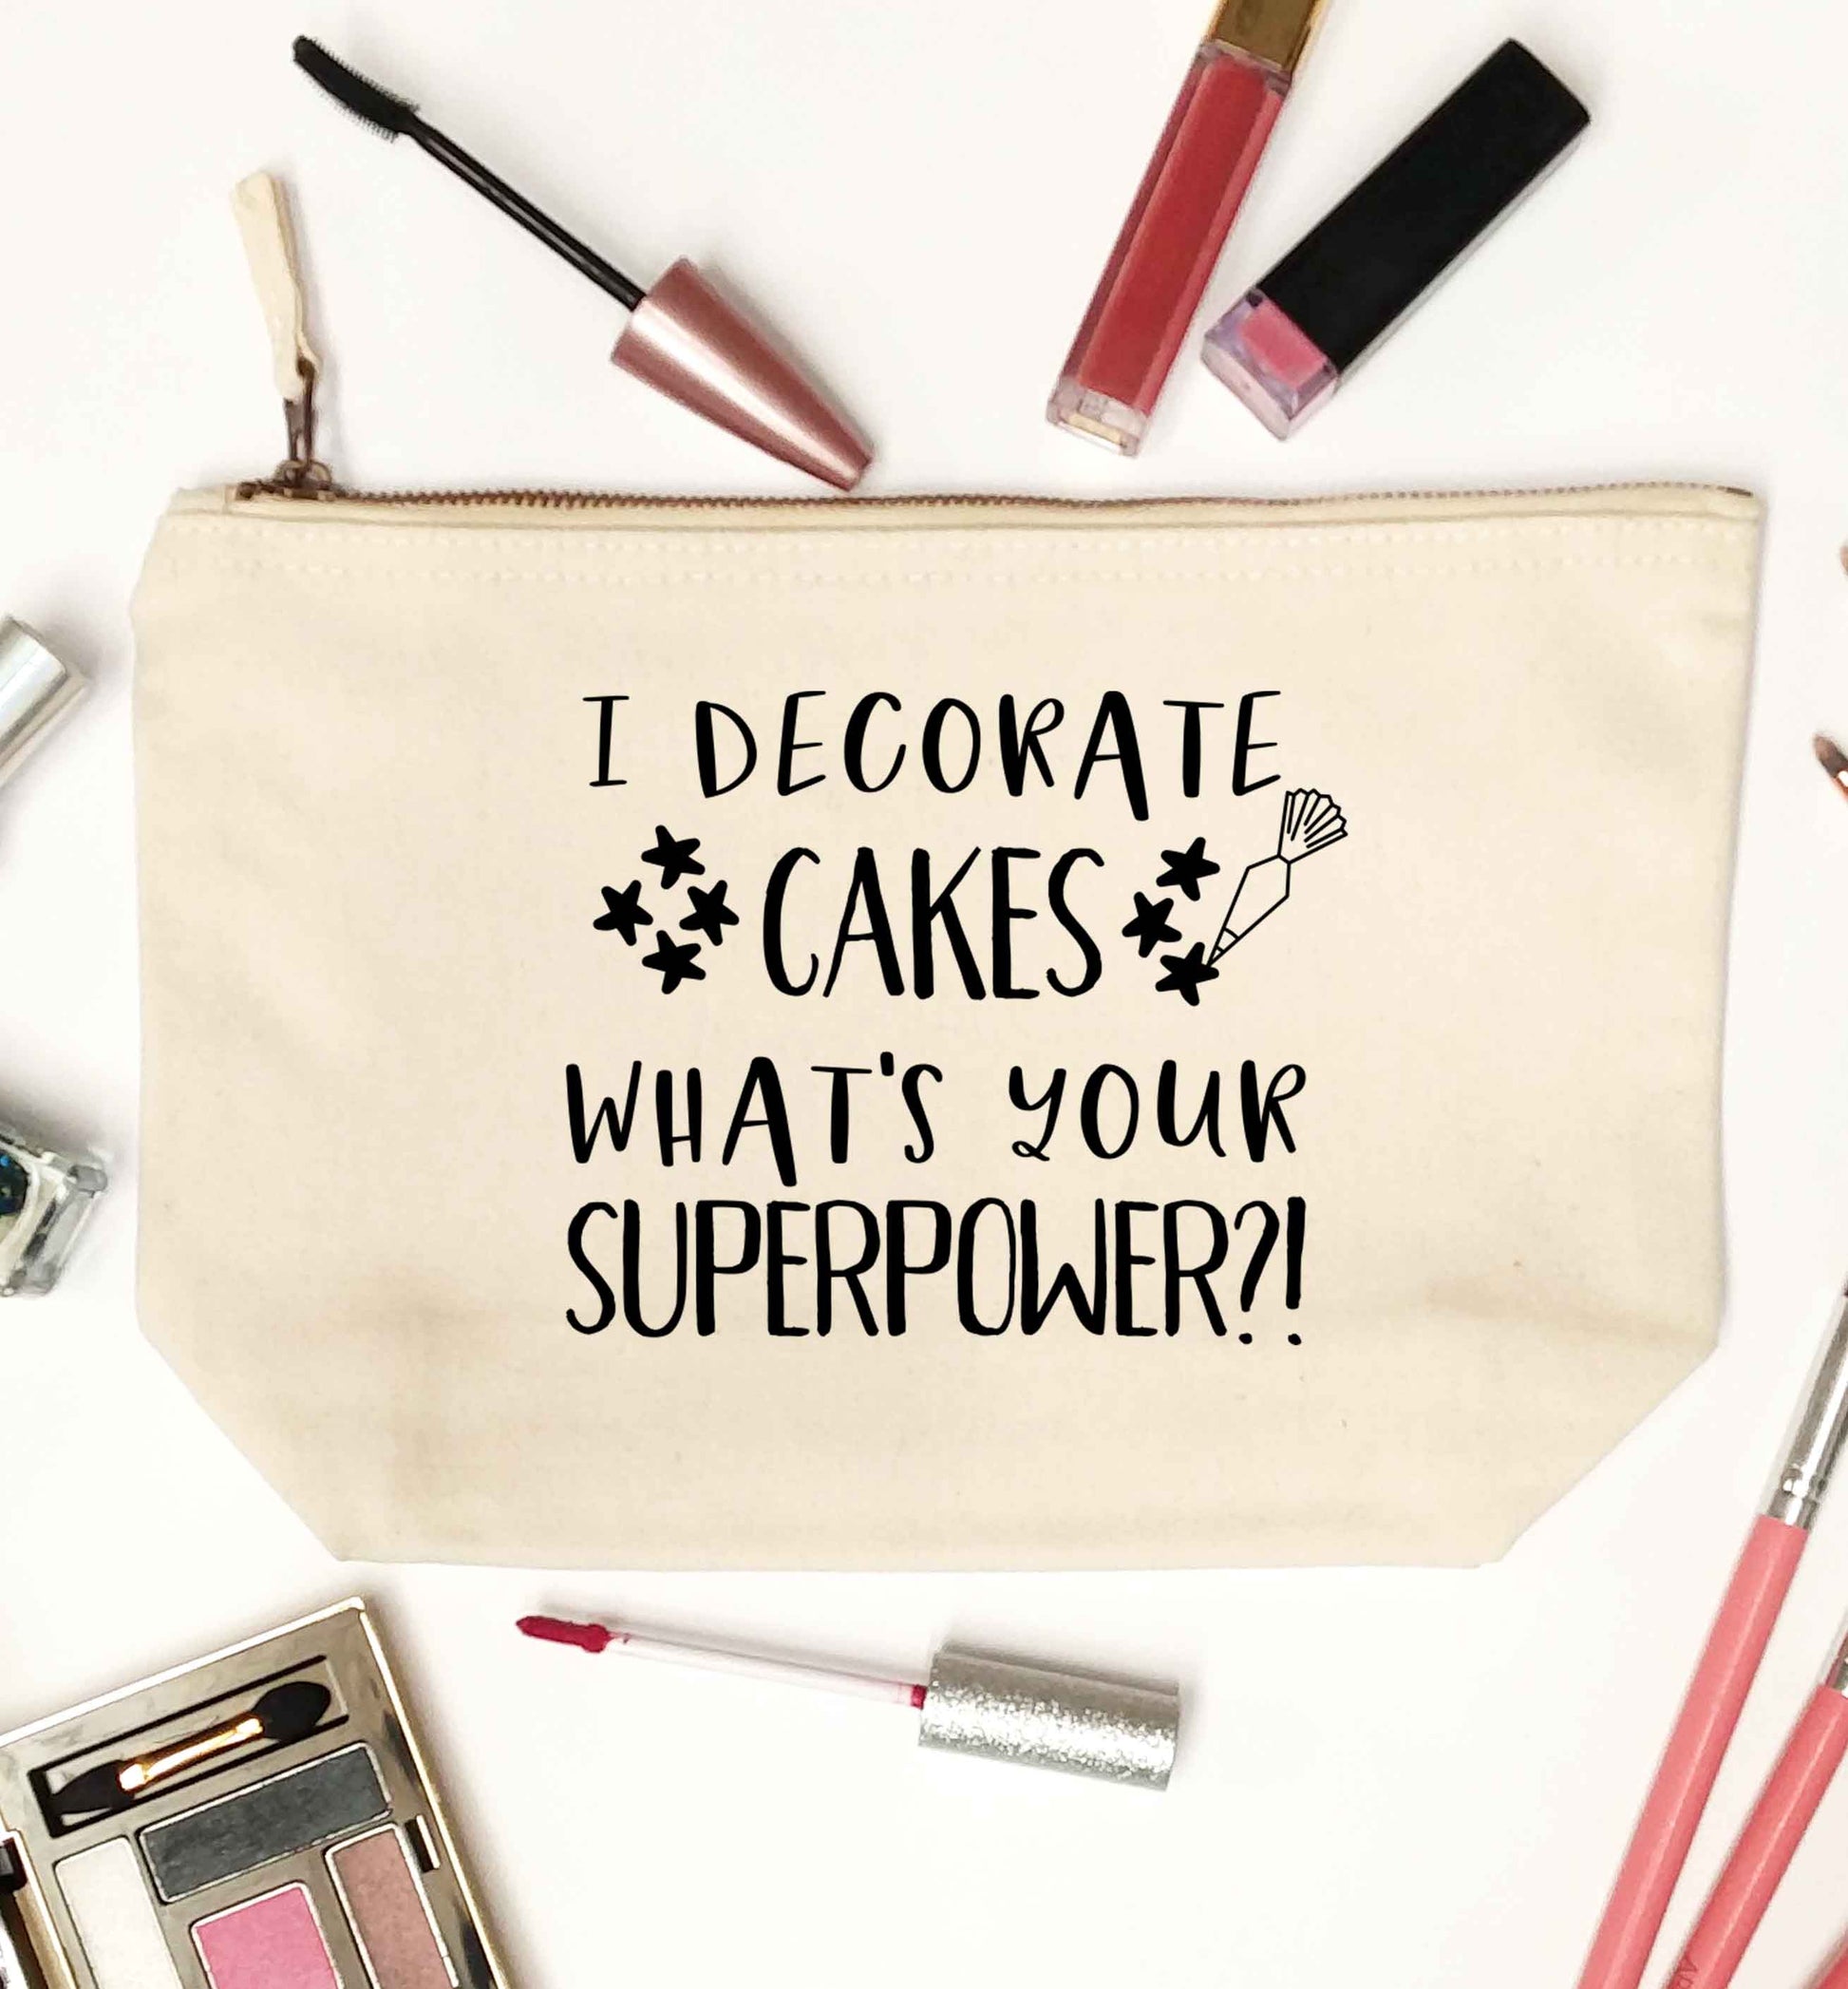 I decorate cakes what's your superpower?! natural makeup bag